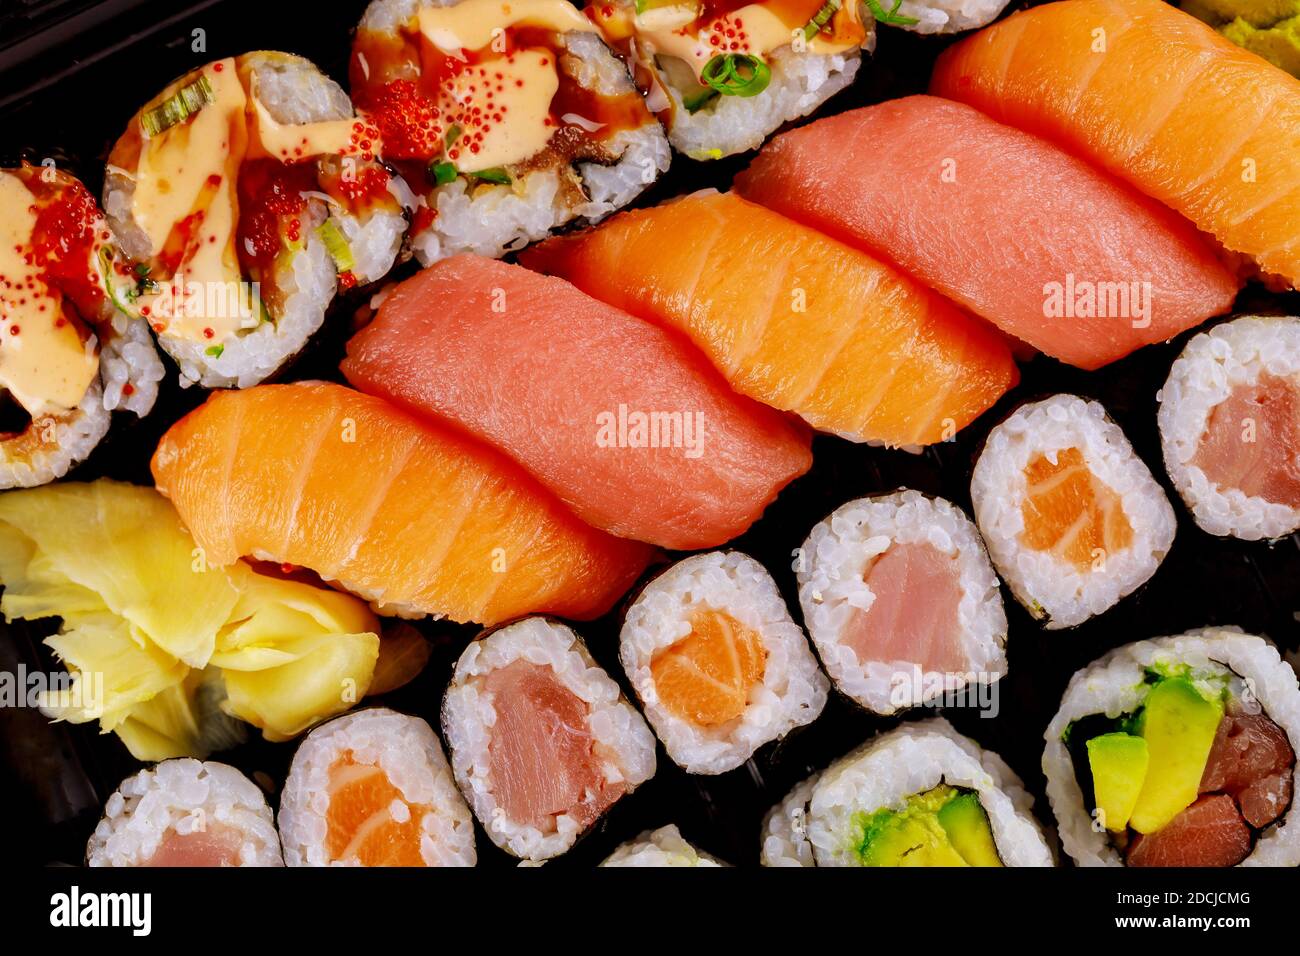 https://c8.alamy.com/comp/2DCJCMG/japanese-delicious-fresh-sushi-roll-set-on-a-black-tray-japanese-food-top-view-2DCJCMG.jpg